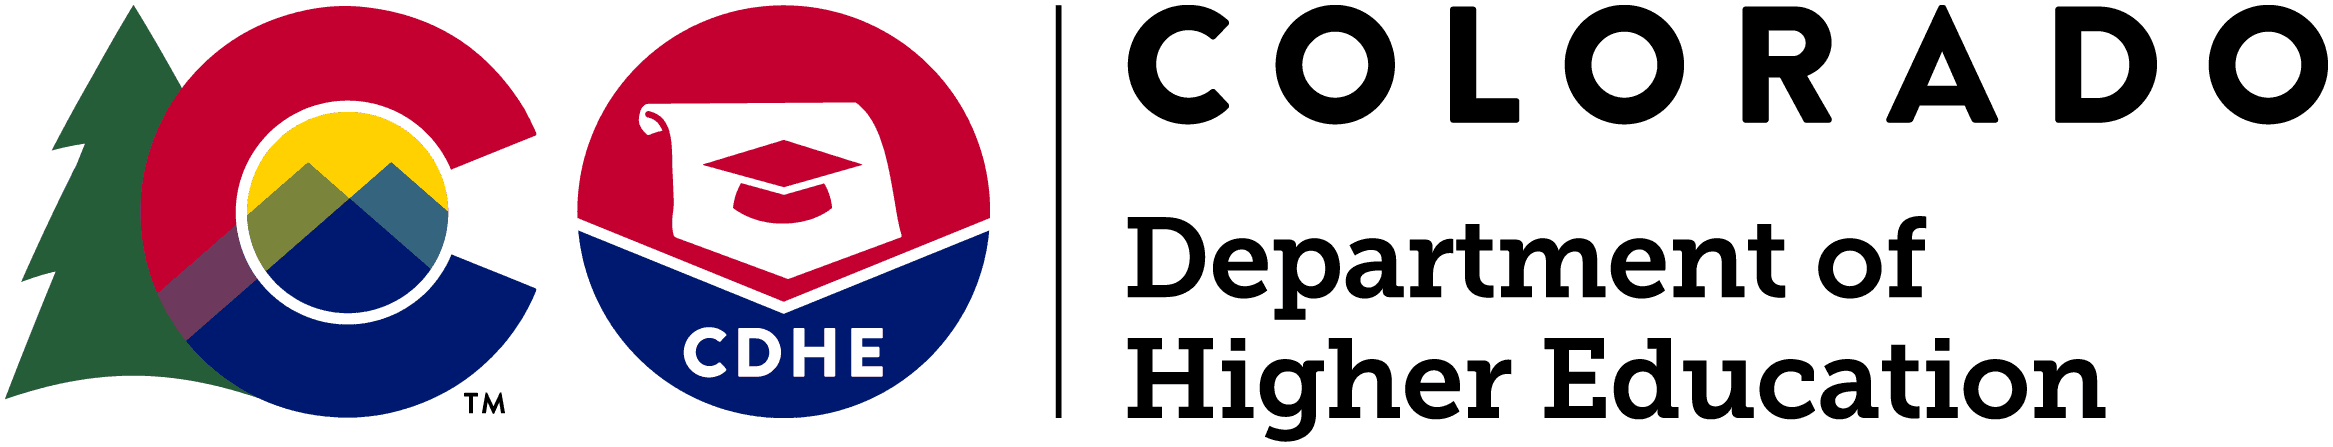 Colorado Department of Higher Education